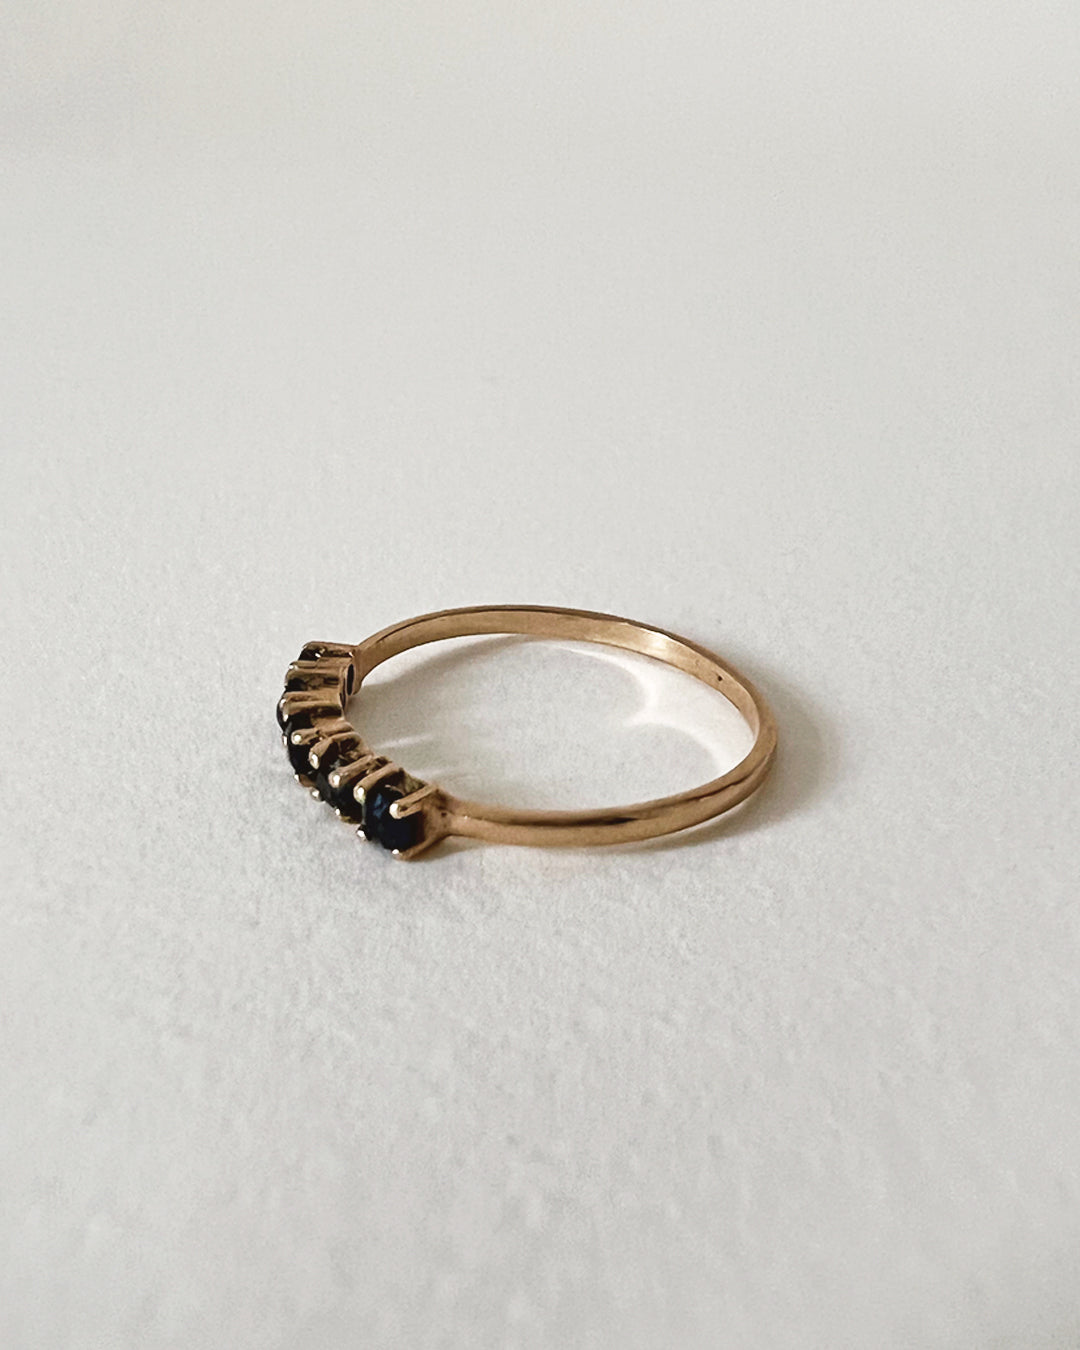 FINE VINTAGE SAPPHIRE ETERNITY RING, 9CT GOLD